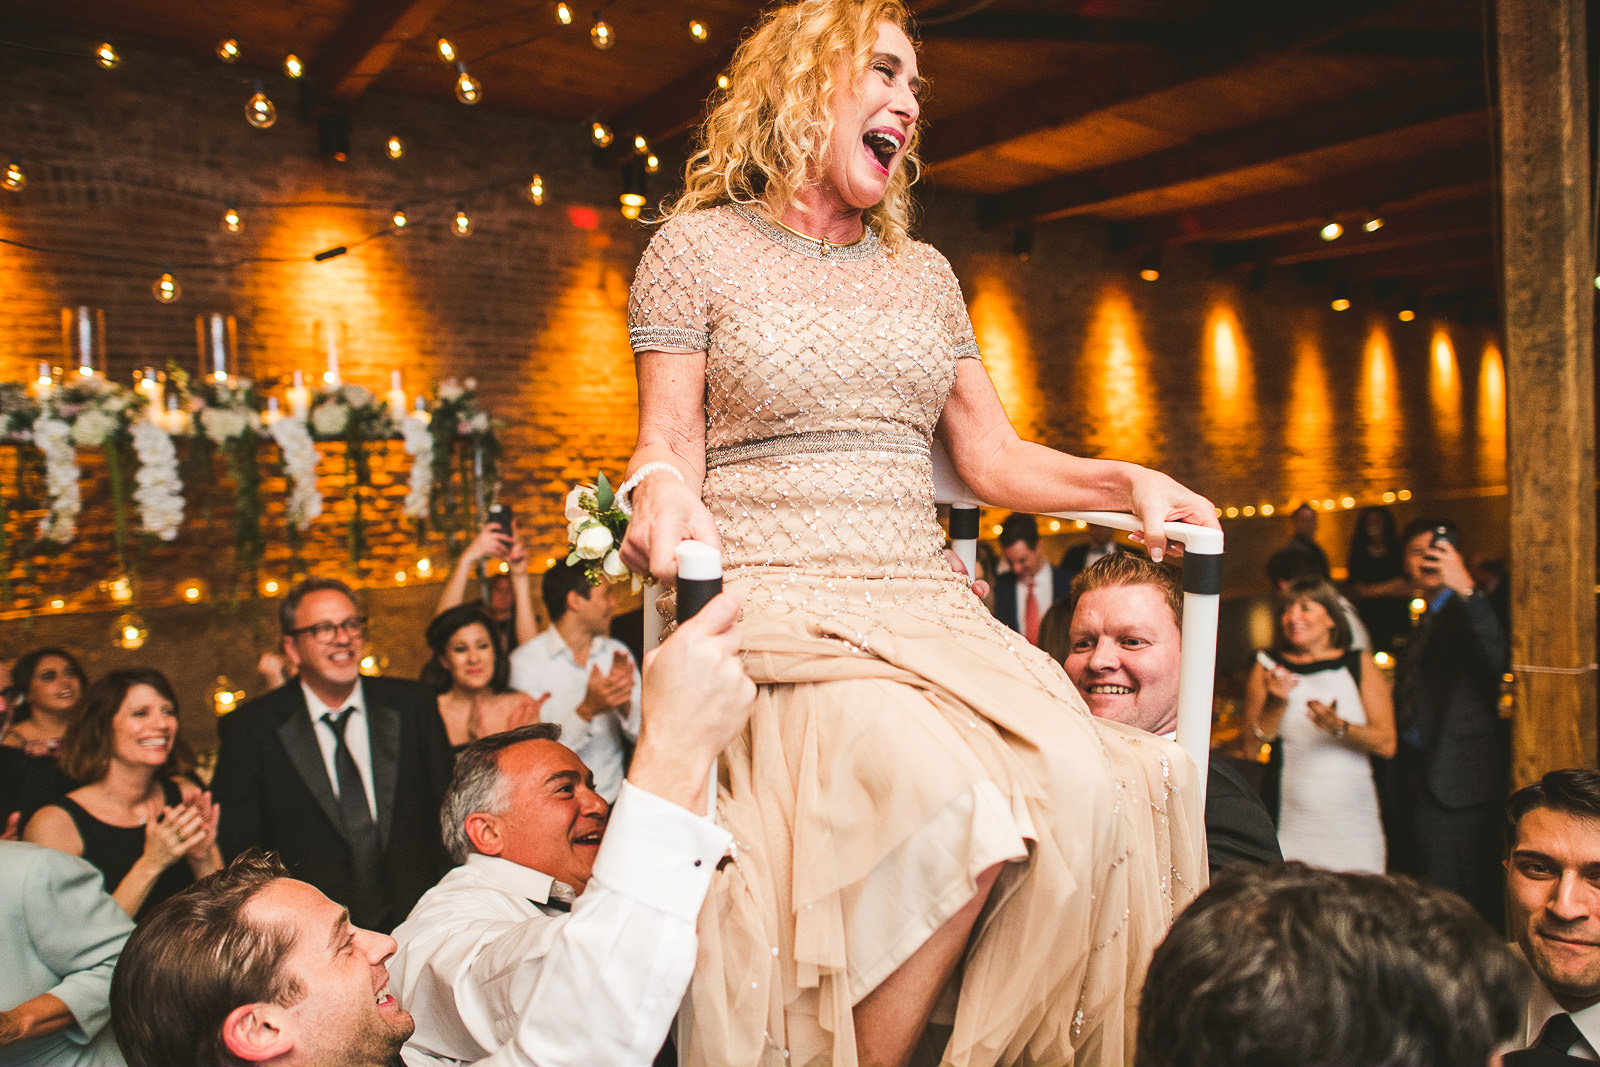 82 mother of the groom hora at wedding - Chicago Wedding Photography at Gallery 1028 // Courtnie + David